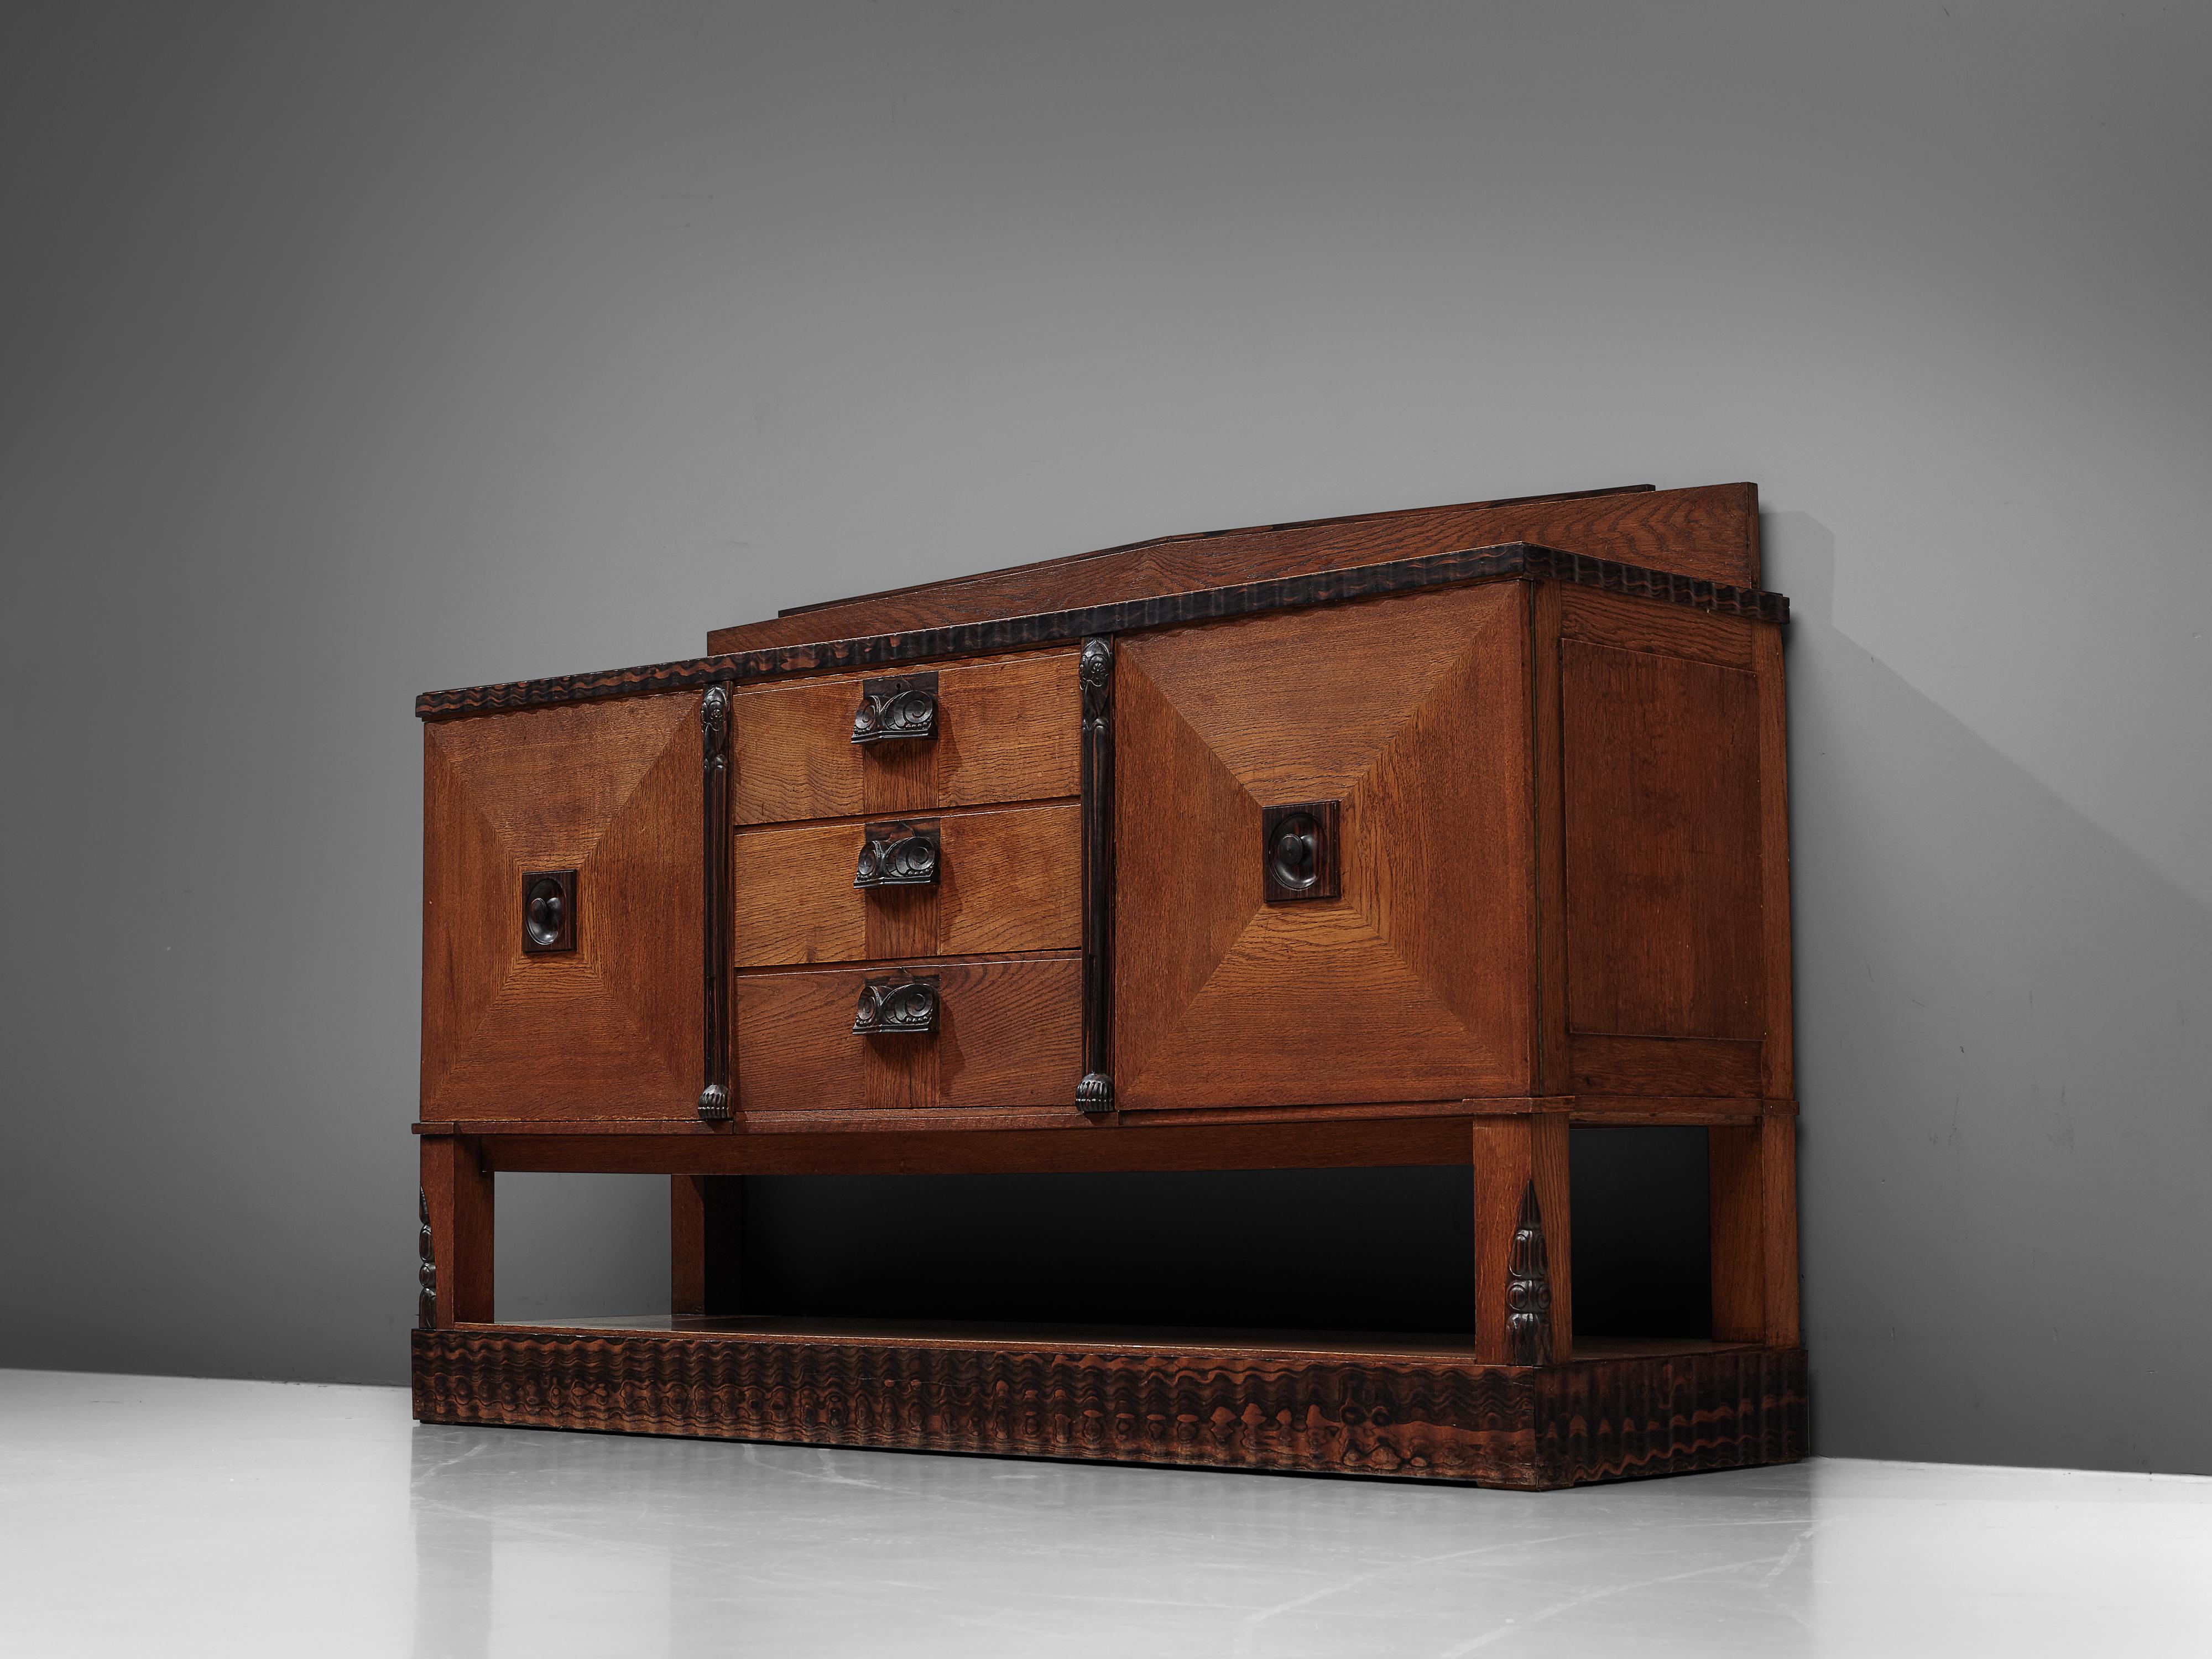 Sideboard, darkened oak, striped ebony, the Netherlands, 1930s

Dutch Art Deco sideboard with carved details in striped ebony. Truly striking about this sideboard is the woodwork in oak and striped ebony. The sideboard is made of oak, with oak